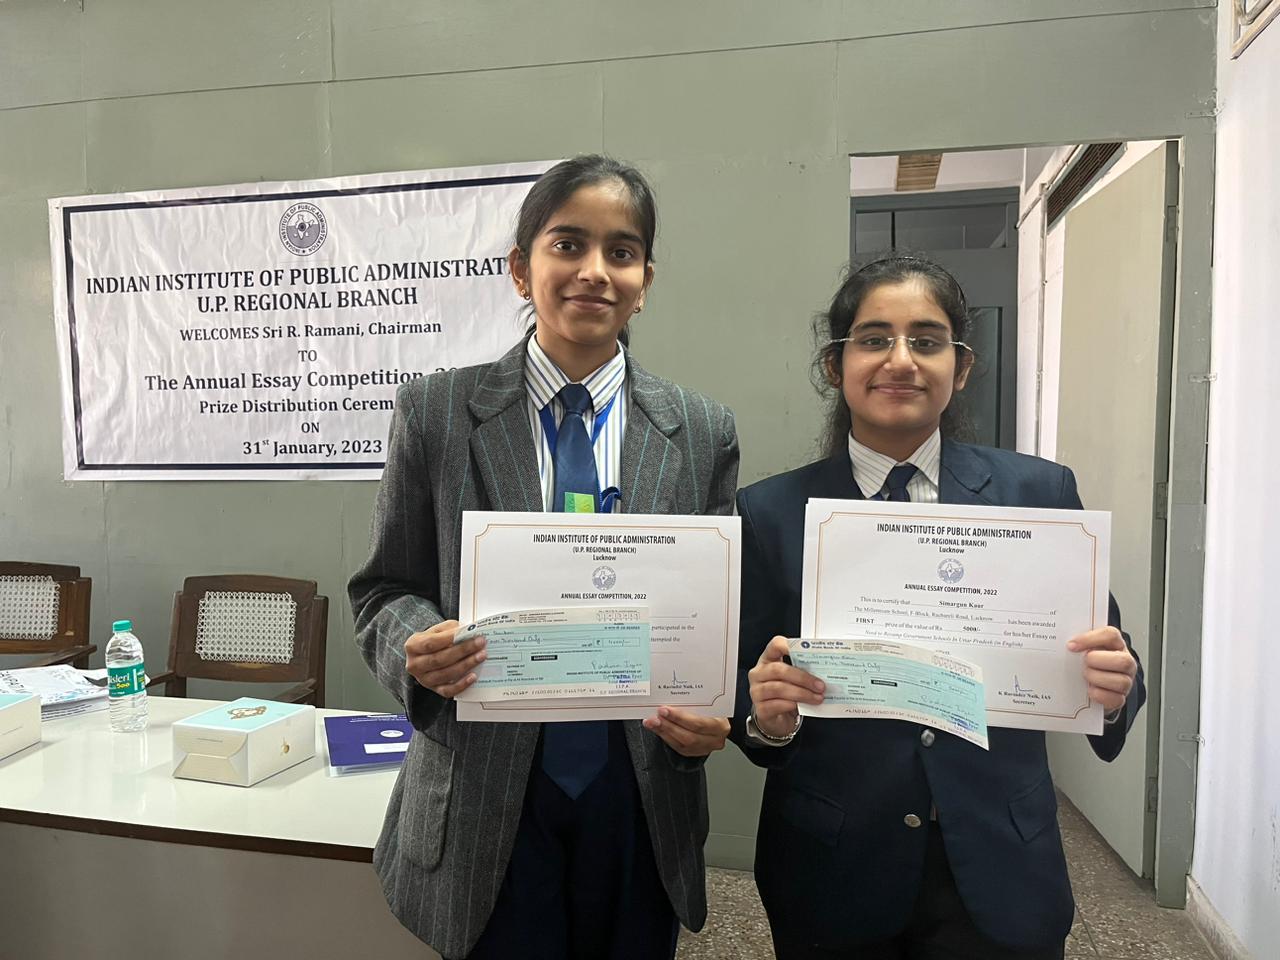 Two of our girls namely Simargun Kaur and Aadya Shankar bagged 1st and 2nd prize each